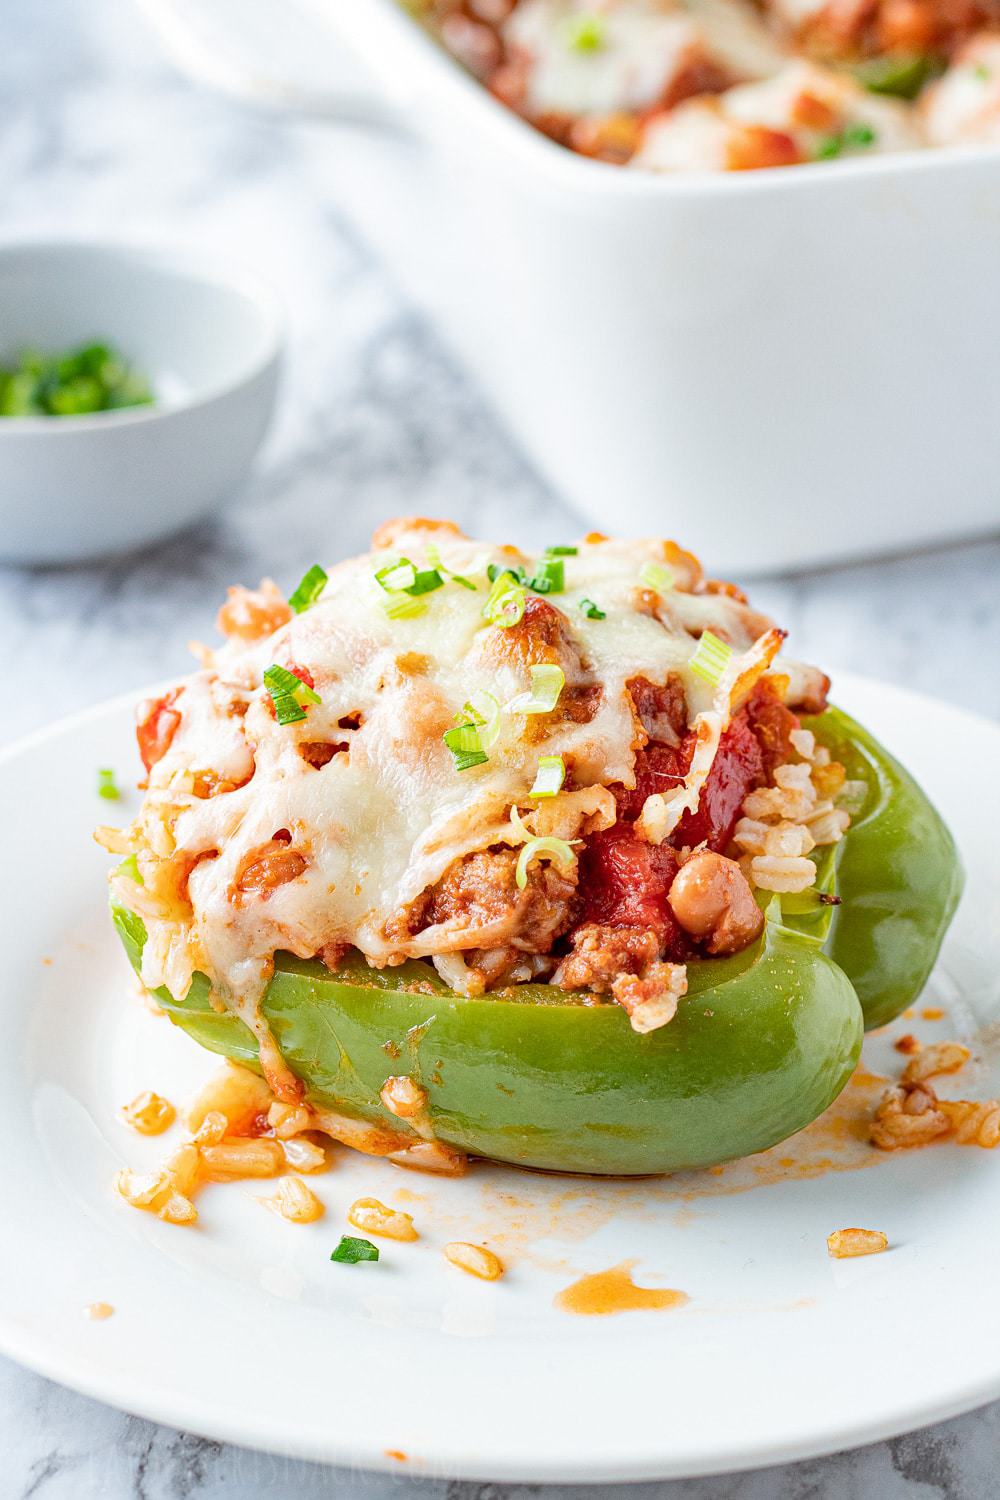 Cooked green pepper filled with ground beef, pinto beans, tomatoes, and cheese on top on a white plate.